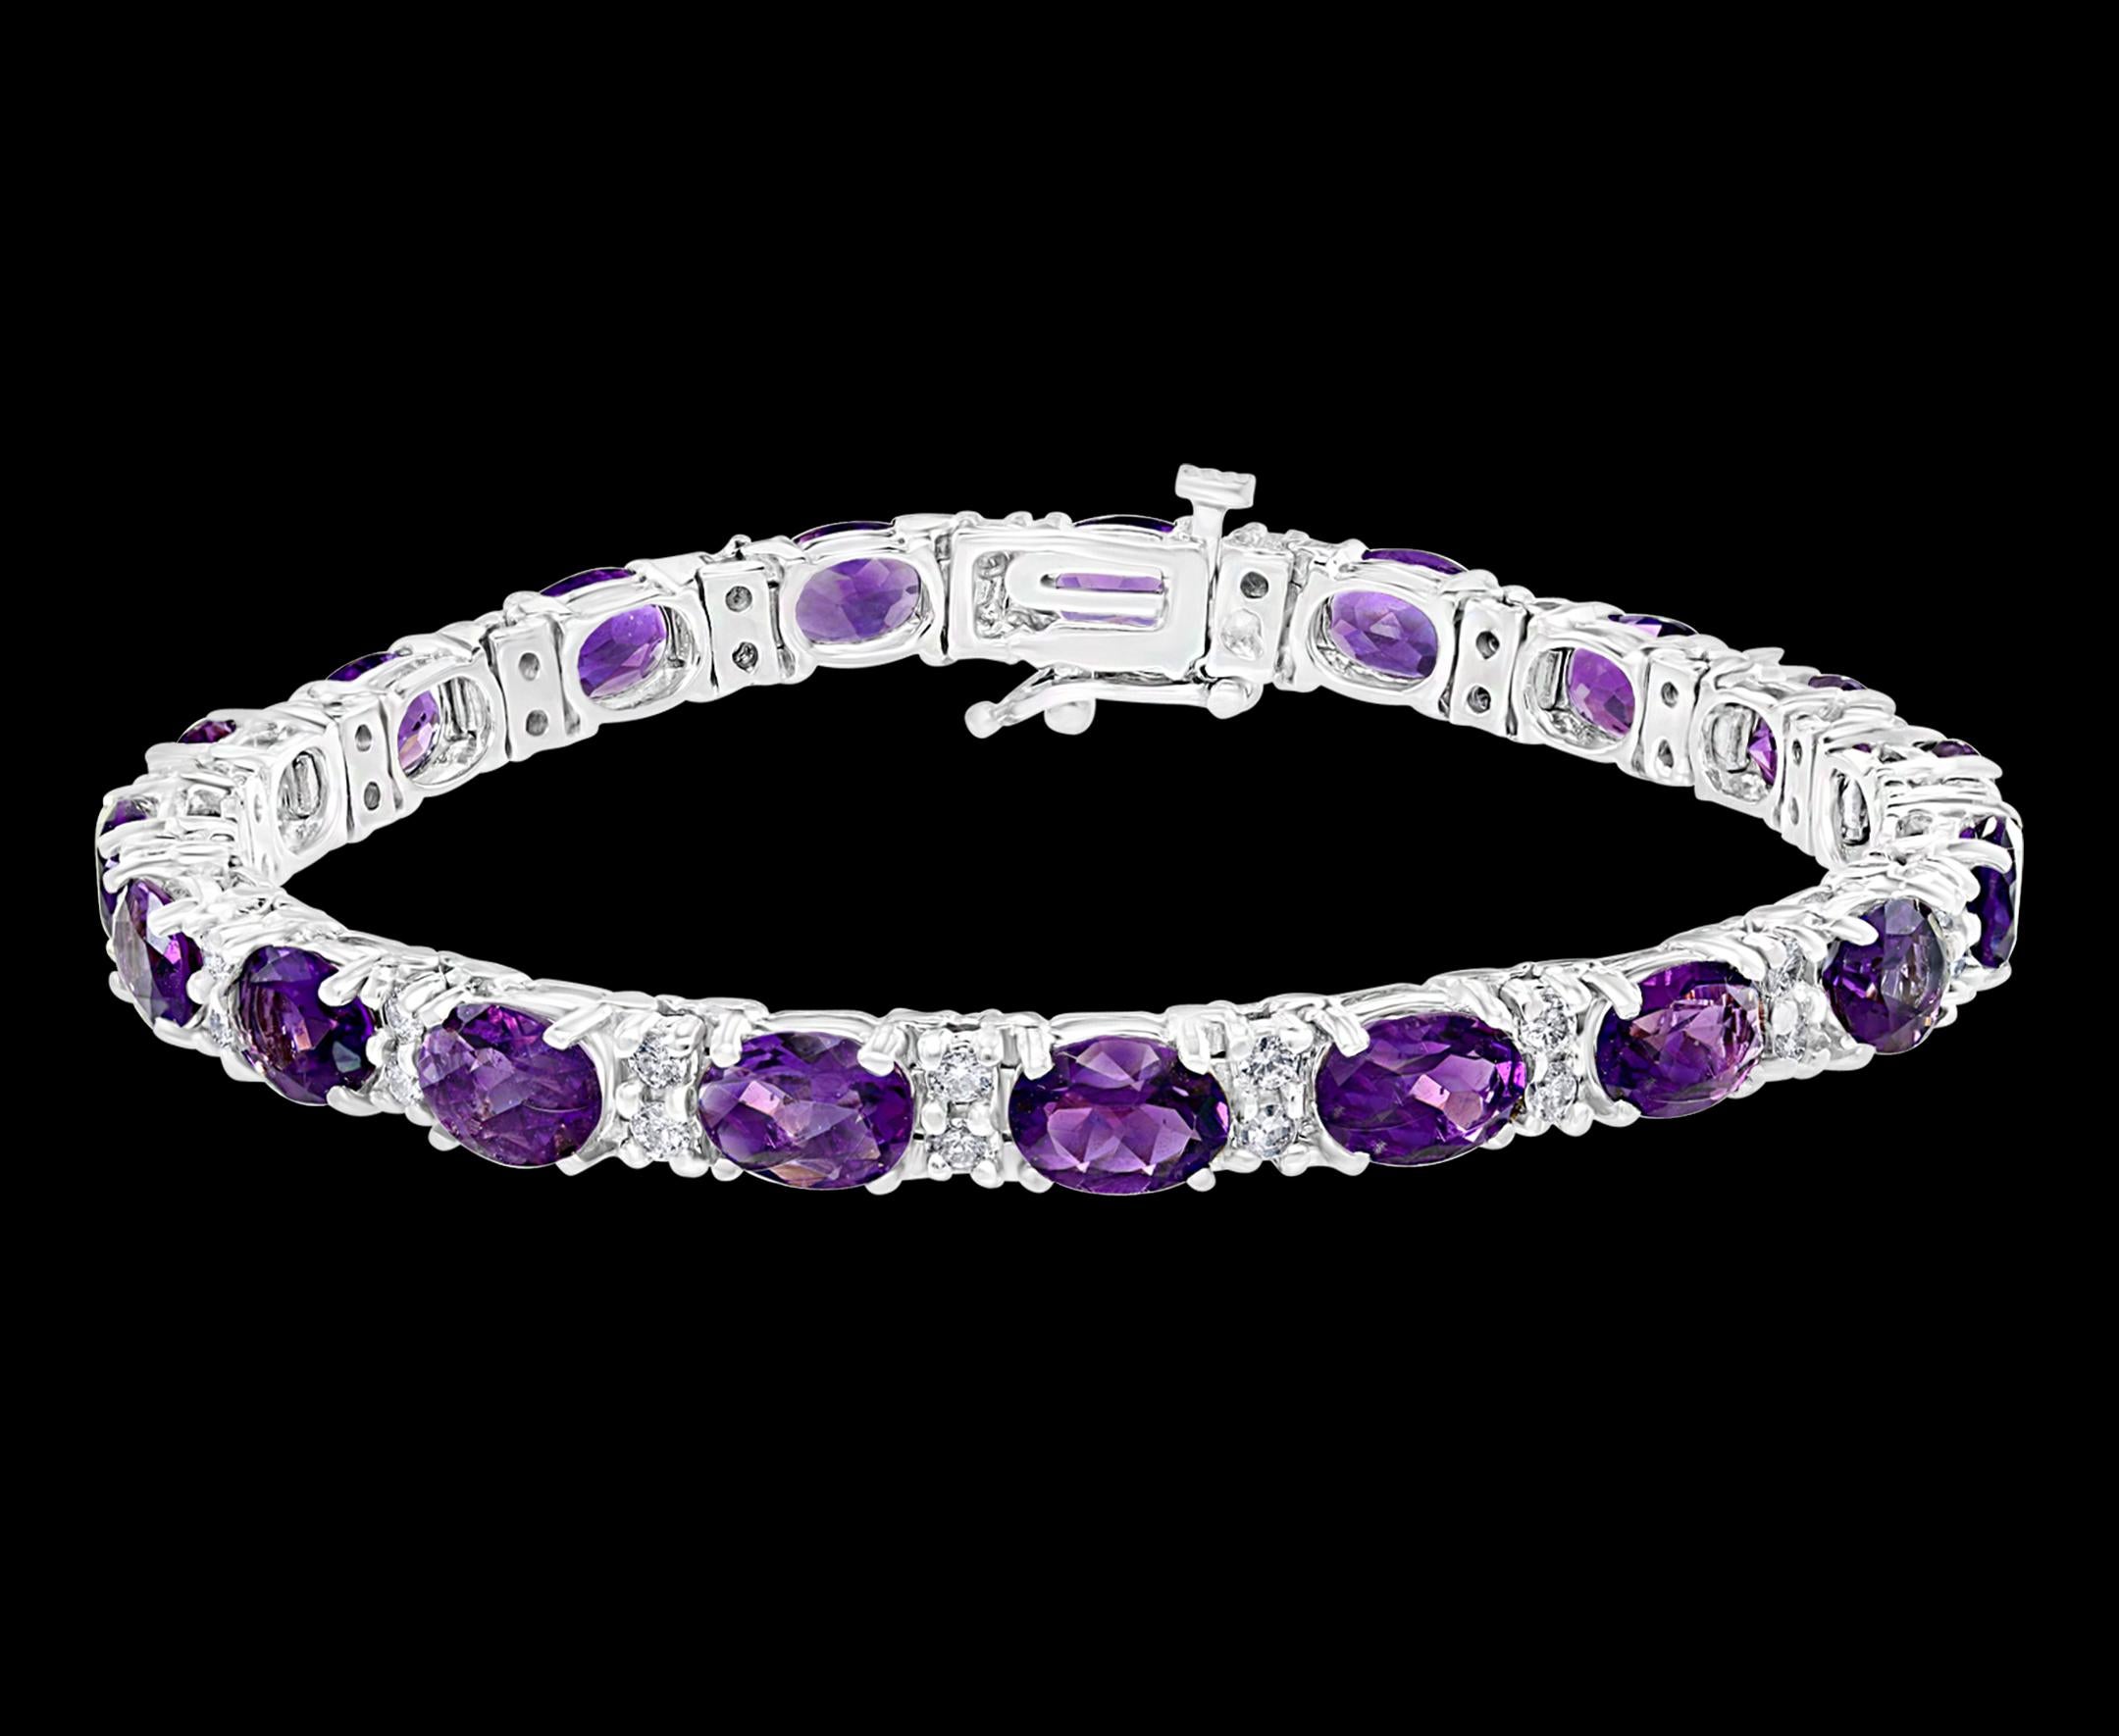  This exceptionally affordable Tennis  bracelet has  18 stones of oval shape Amethyst
Beautiful colors , very Vibrant
Size of the stone is approximately 7X5 mm
Each Amethyst is spaced by two brilliant round Diamonds.
Total weight of the Diamond is